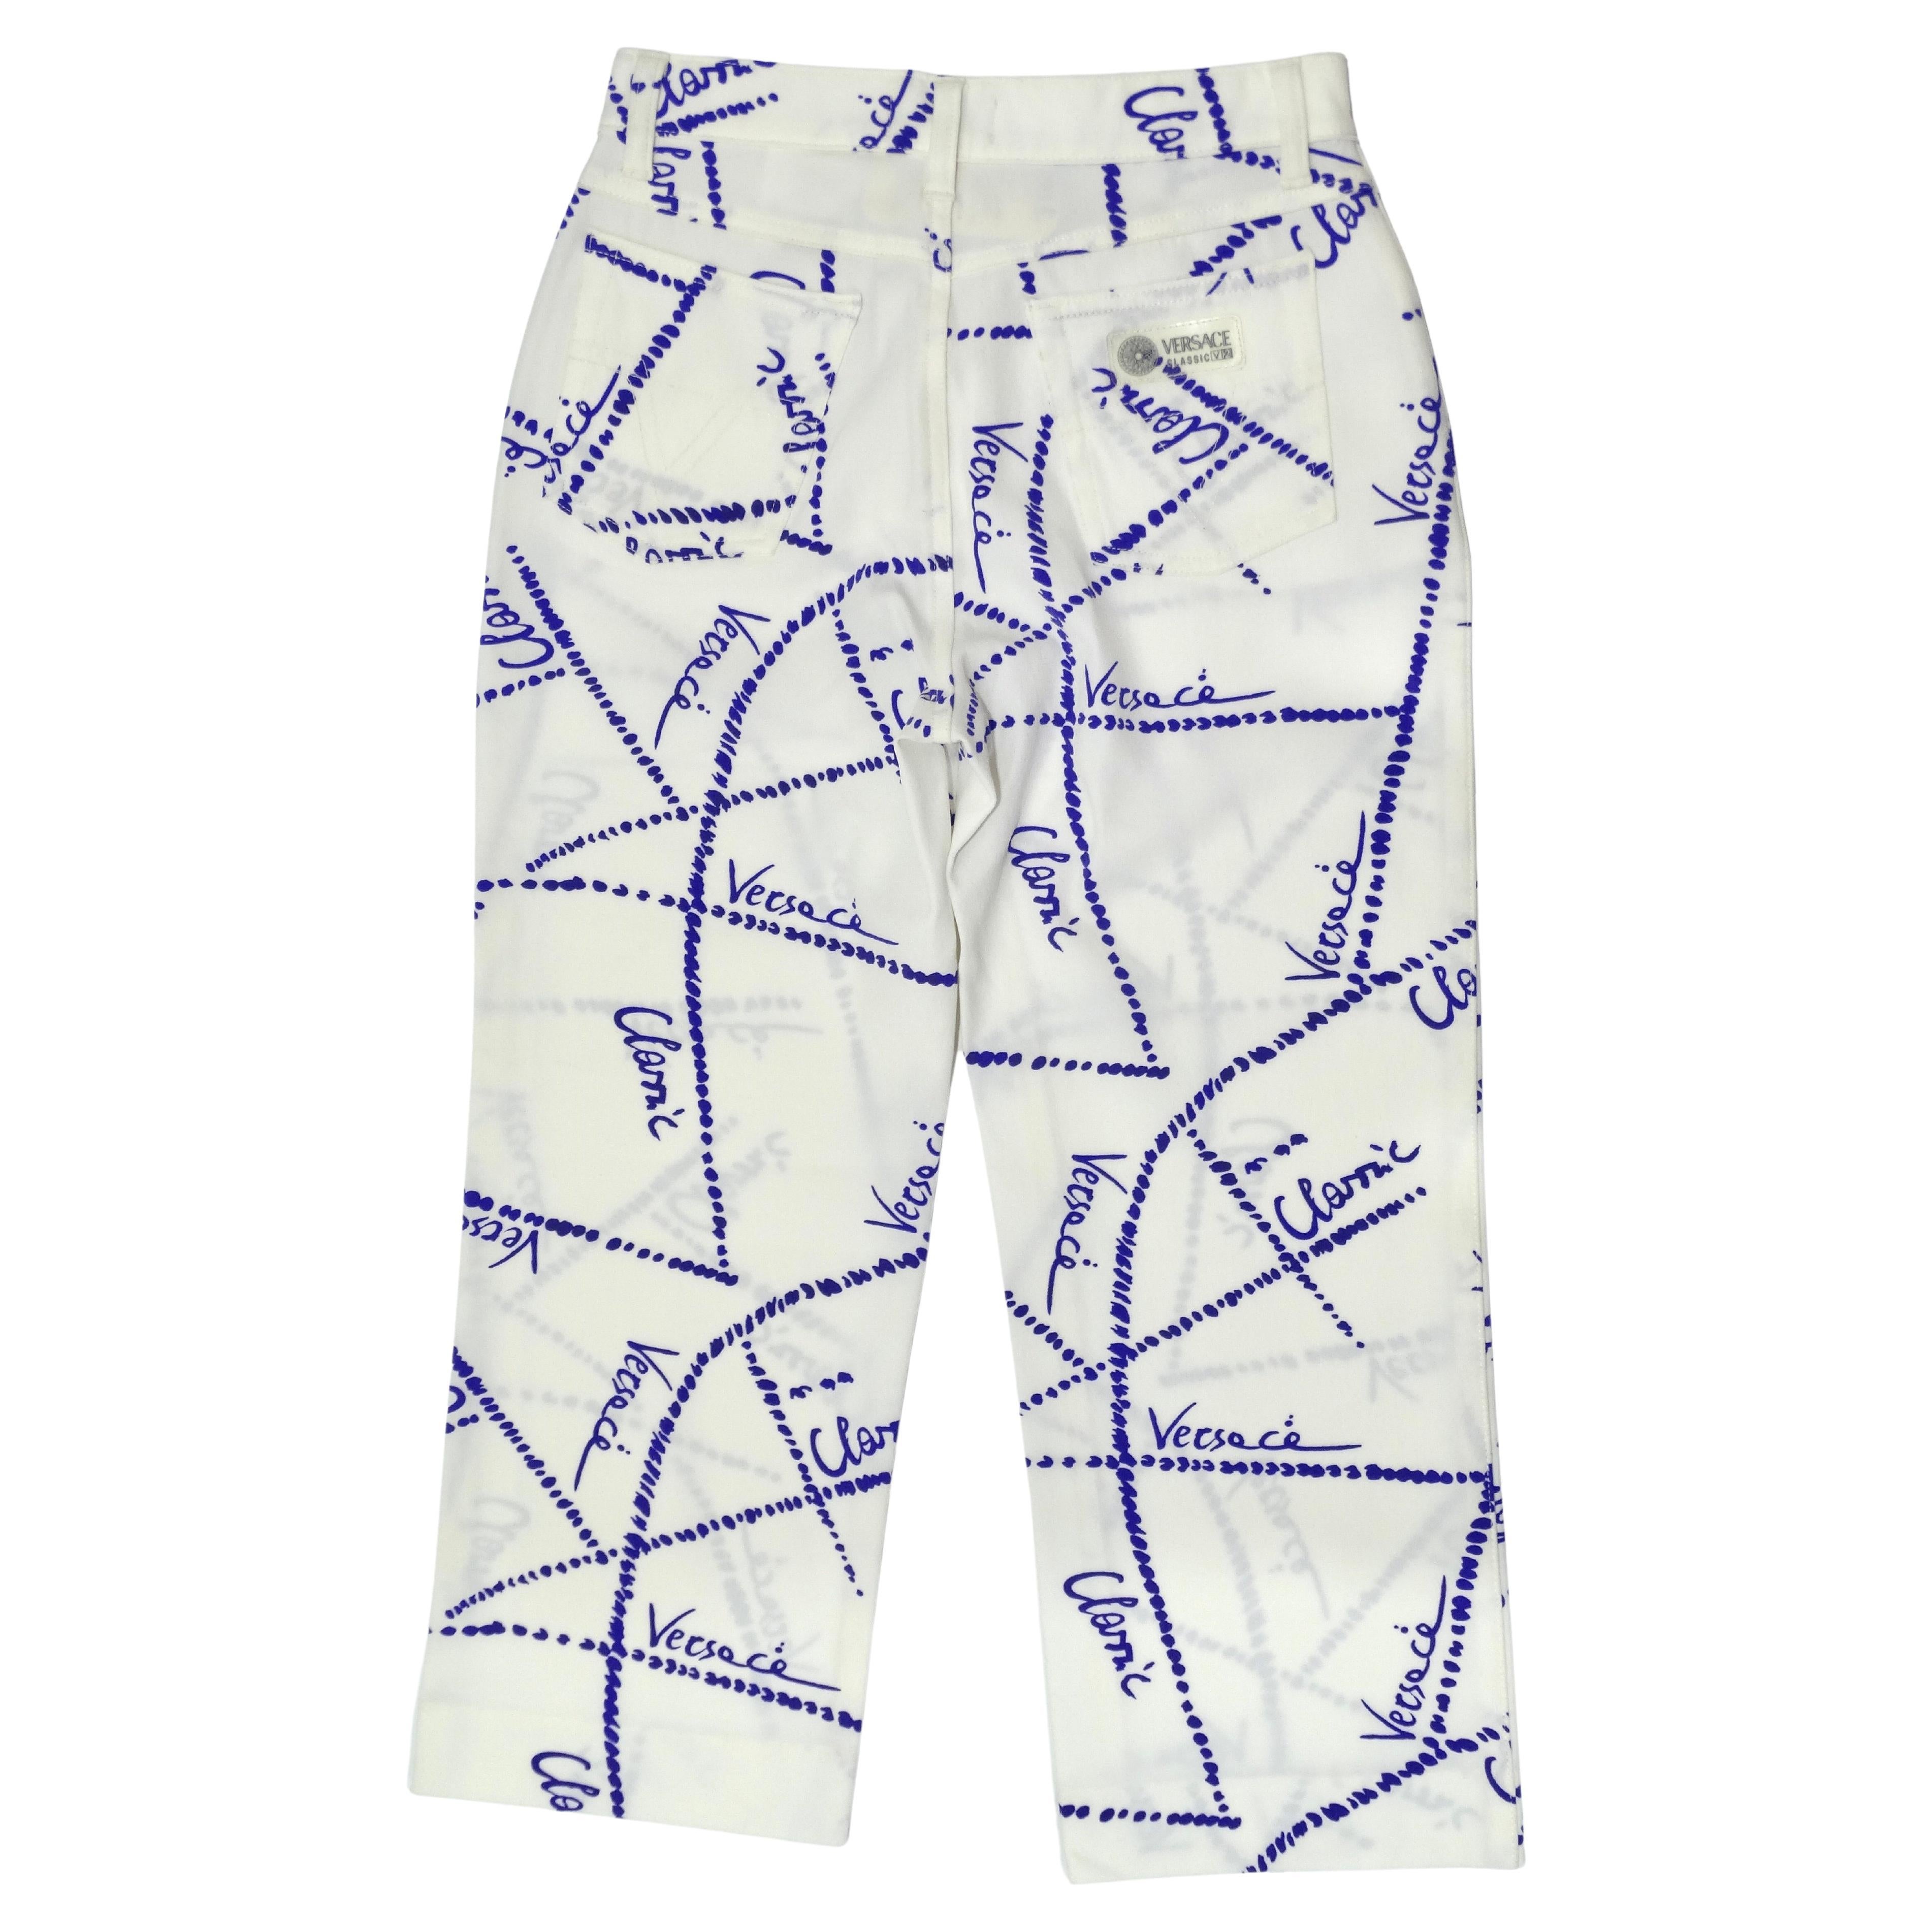 These are an ultra-rare pair of Versace trousers with a paired-back pattern and cropped length. The pattern depicts blue dotted lines and cursive 'versace' throughout. Features button closure, strechy fabric, straight leg, and an ultra-high rise.